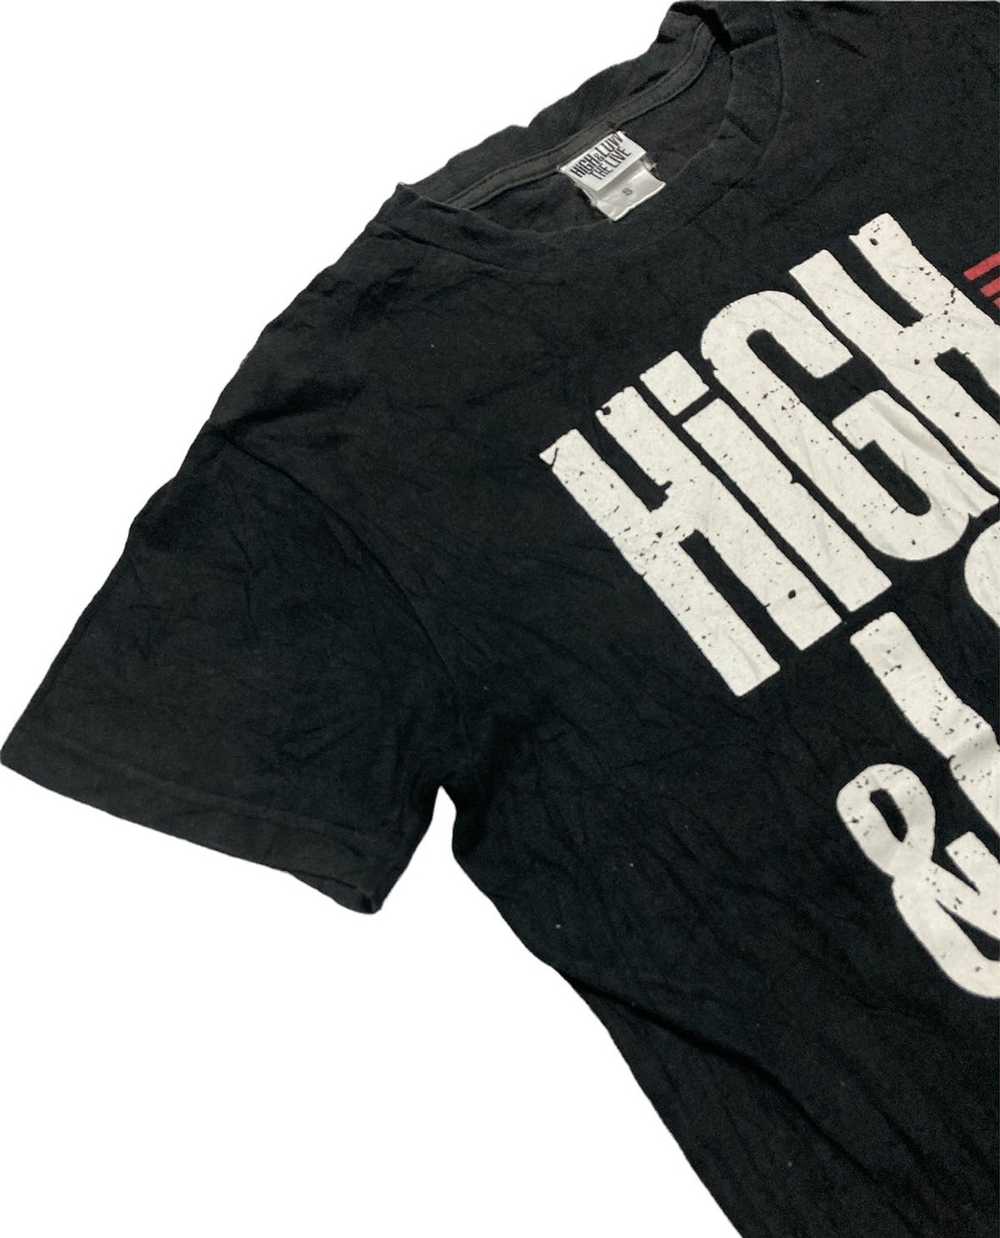 Band Tees × Japanese Brand × Movie HIGH & LOW THE… - image 2